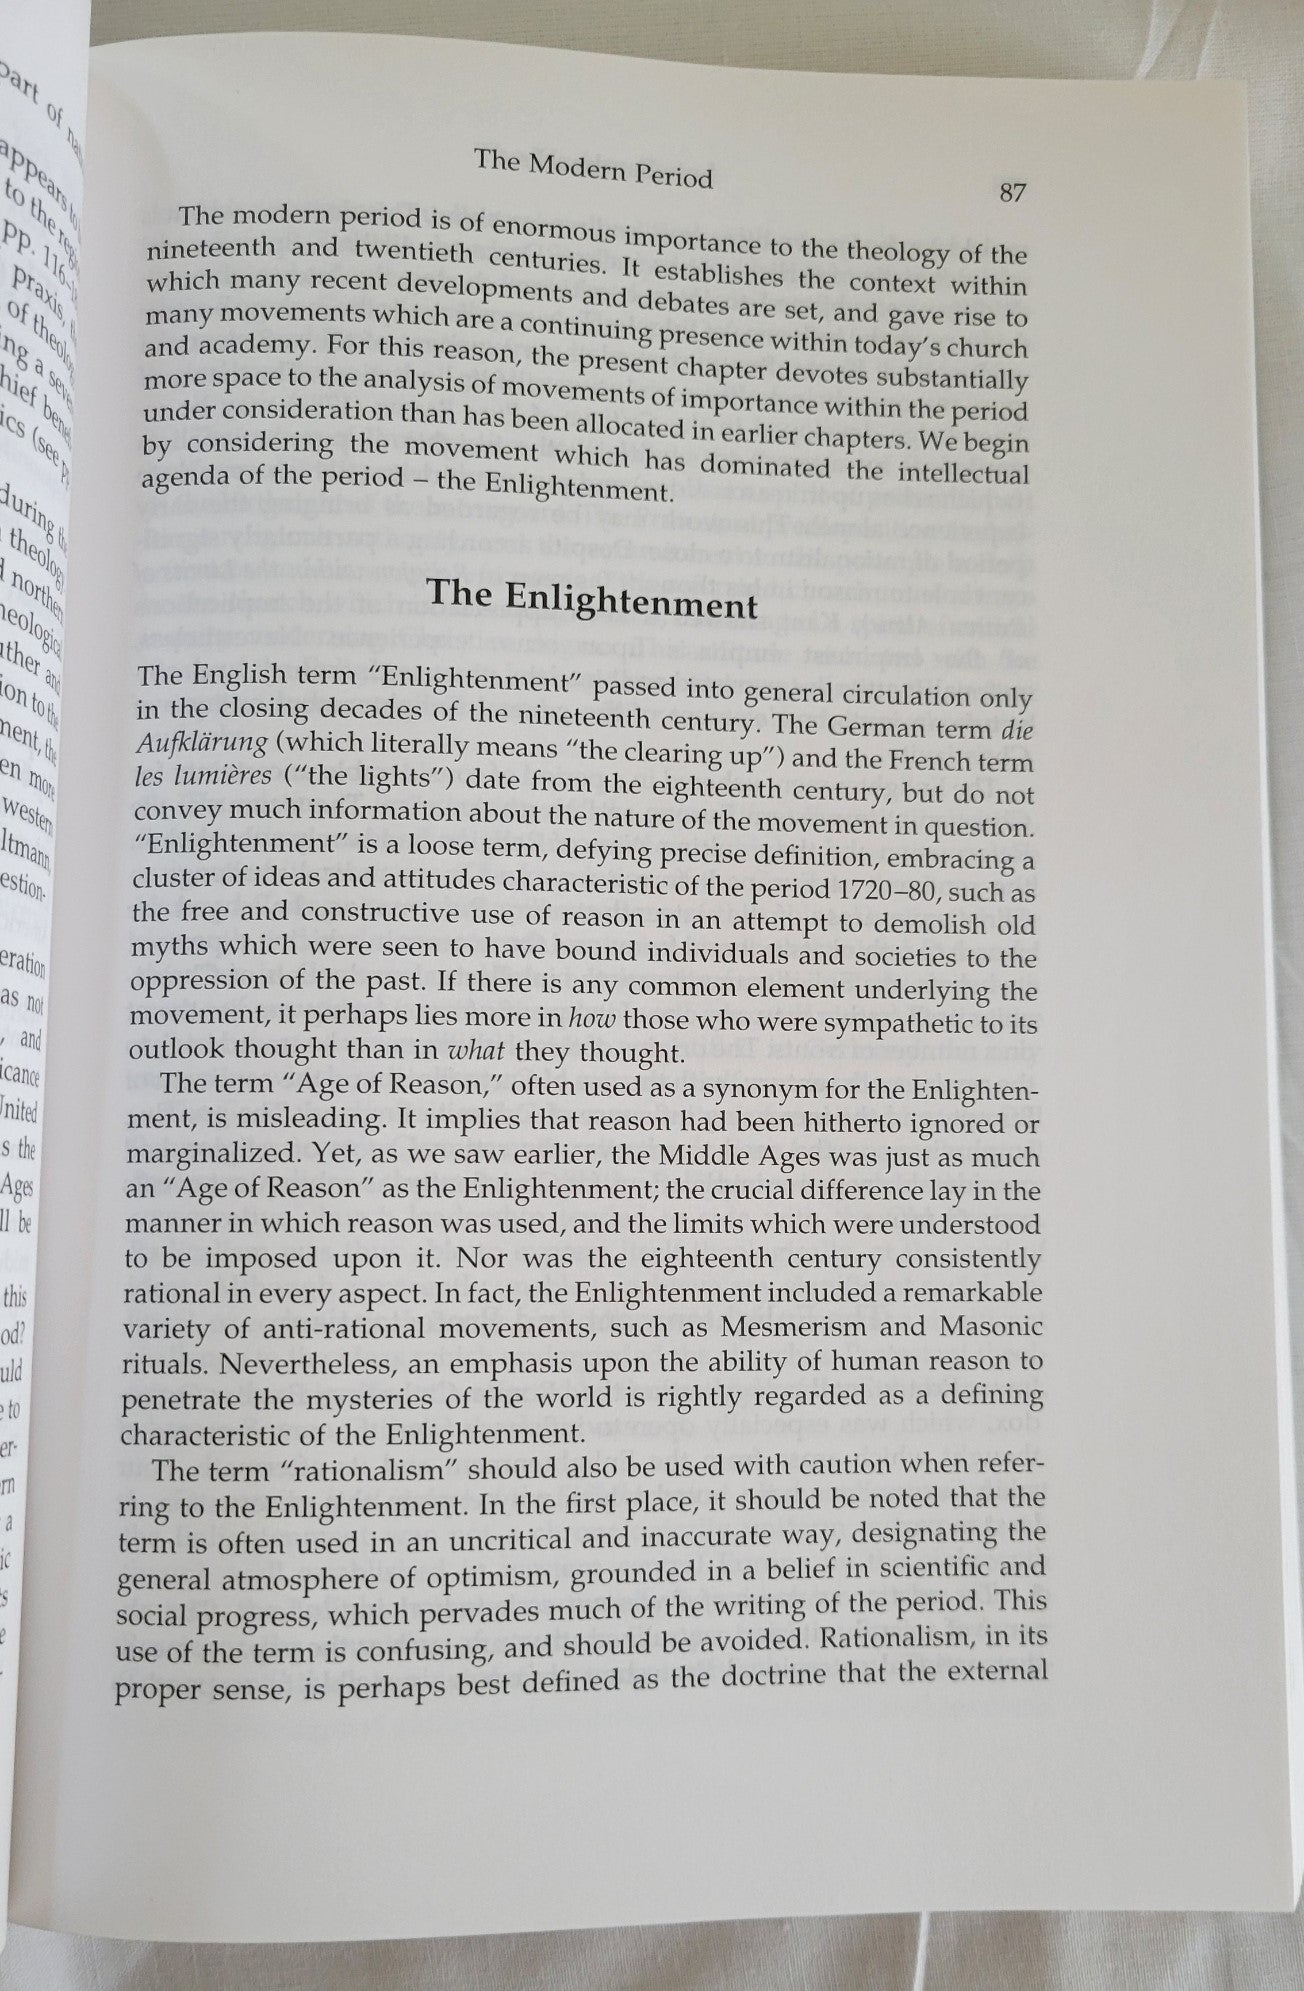 Used book. Christian Theology: An Introduction, Second Edition written by Alister McGrath, published by Blackwell Publishers.  View of page 87